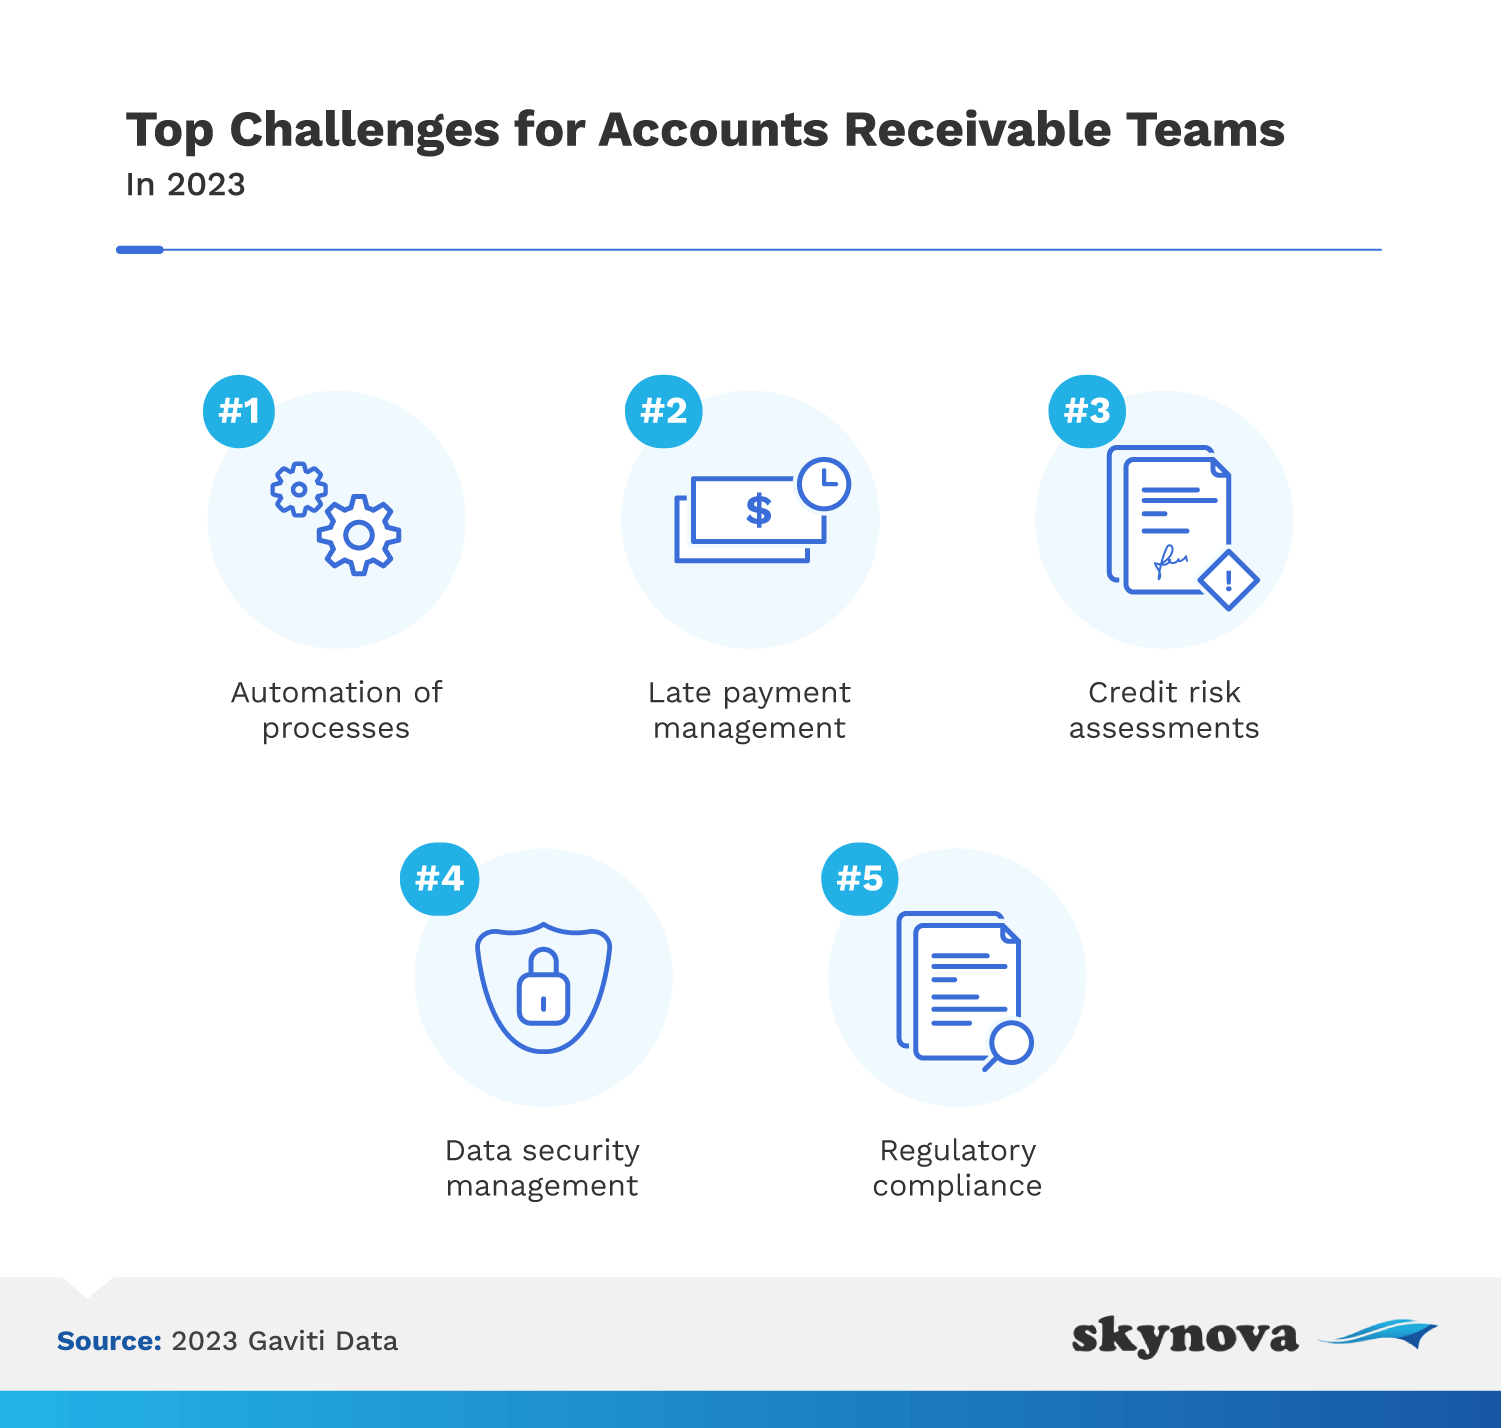 Top challenges for accounts receivable teams